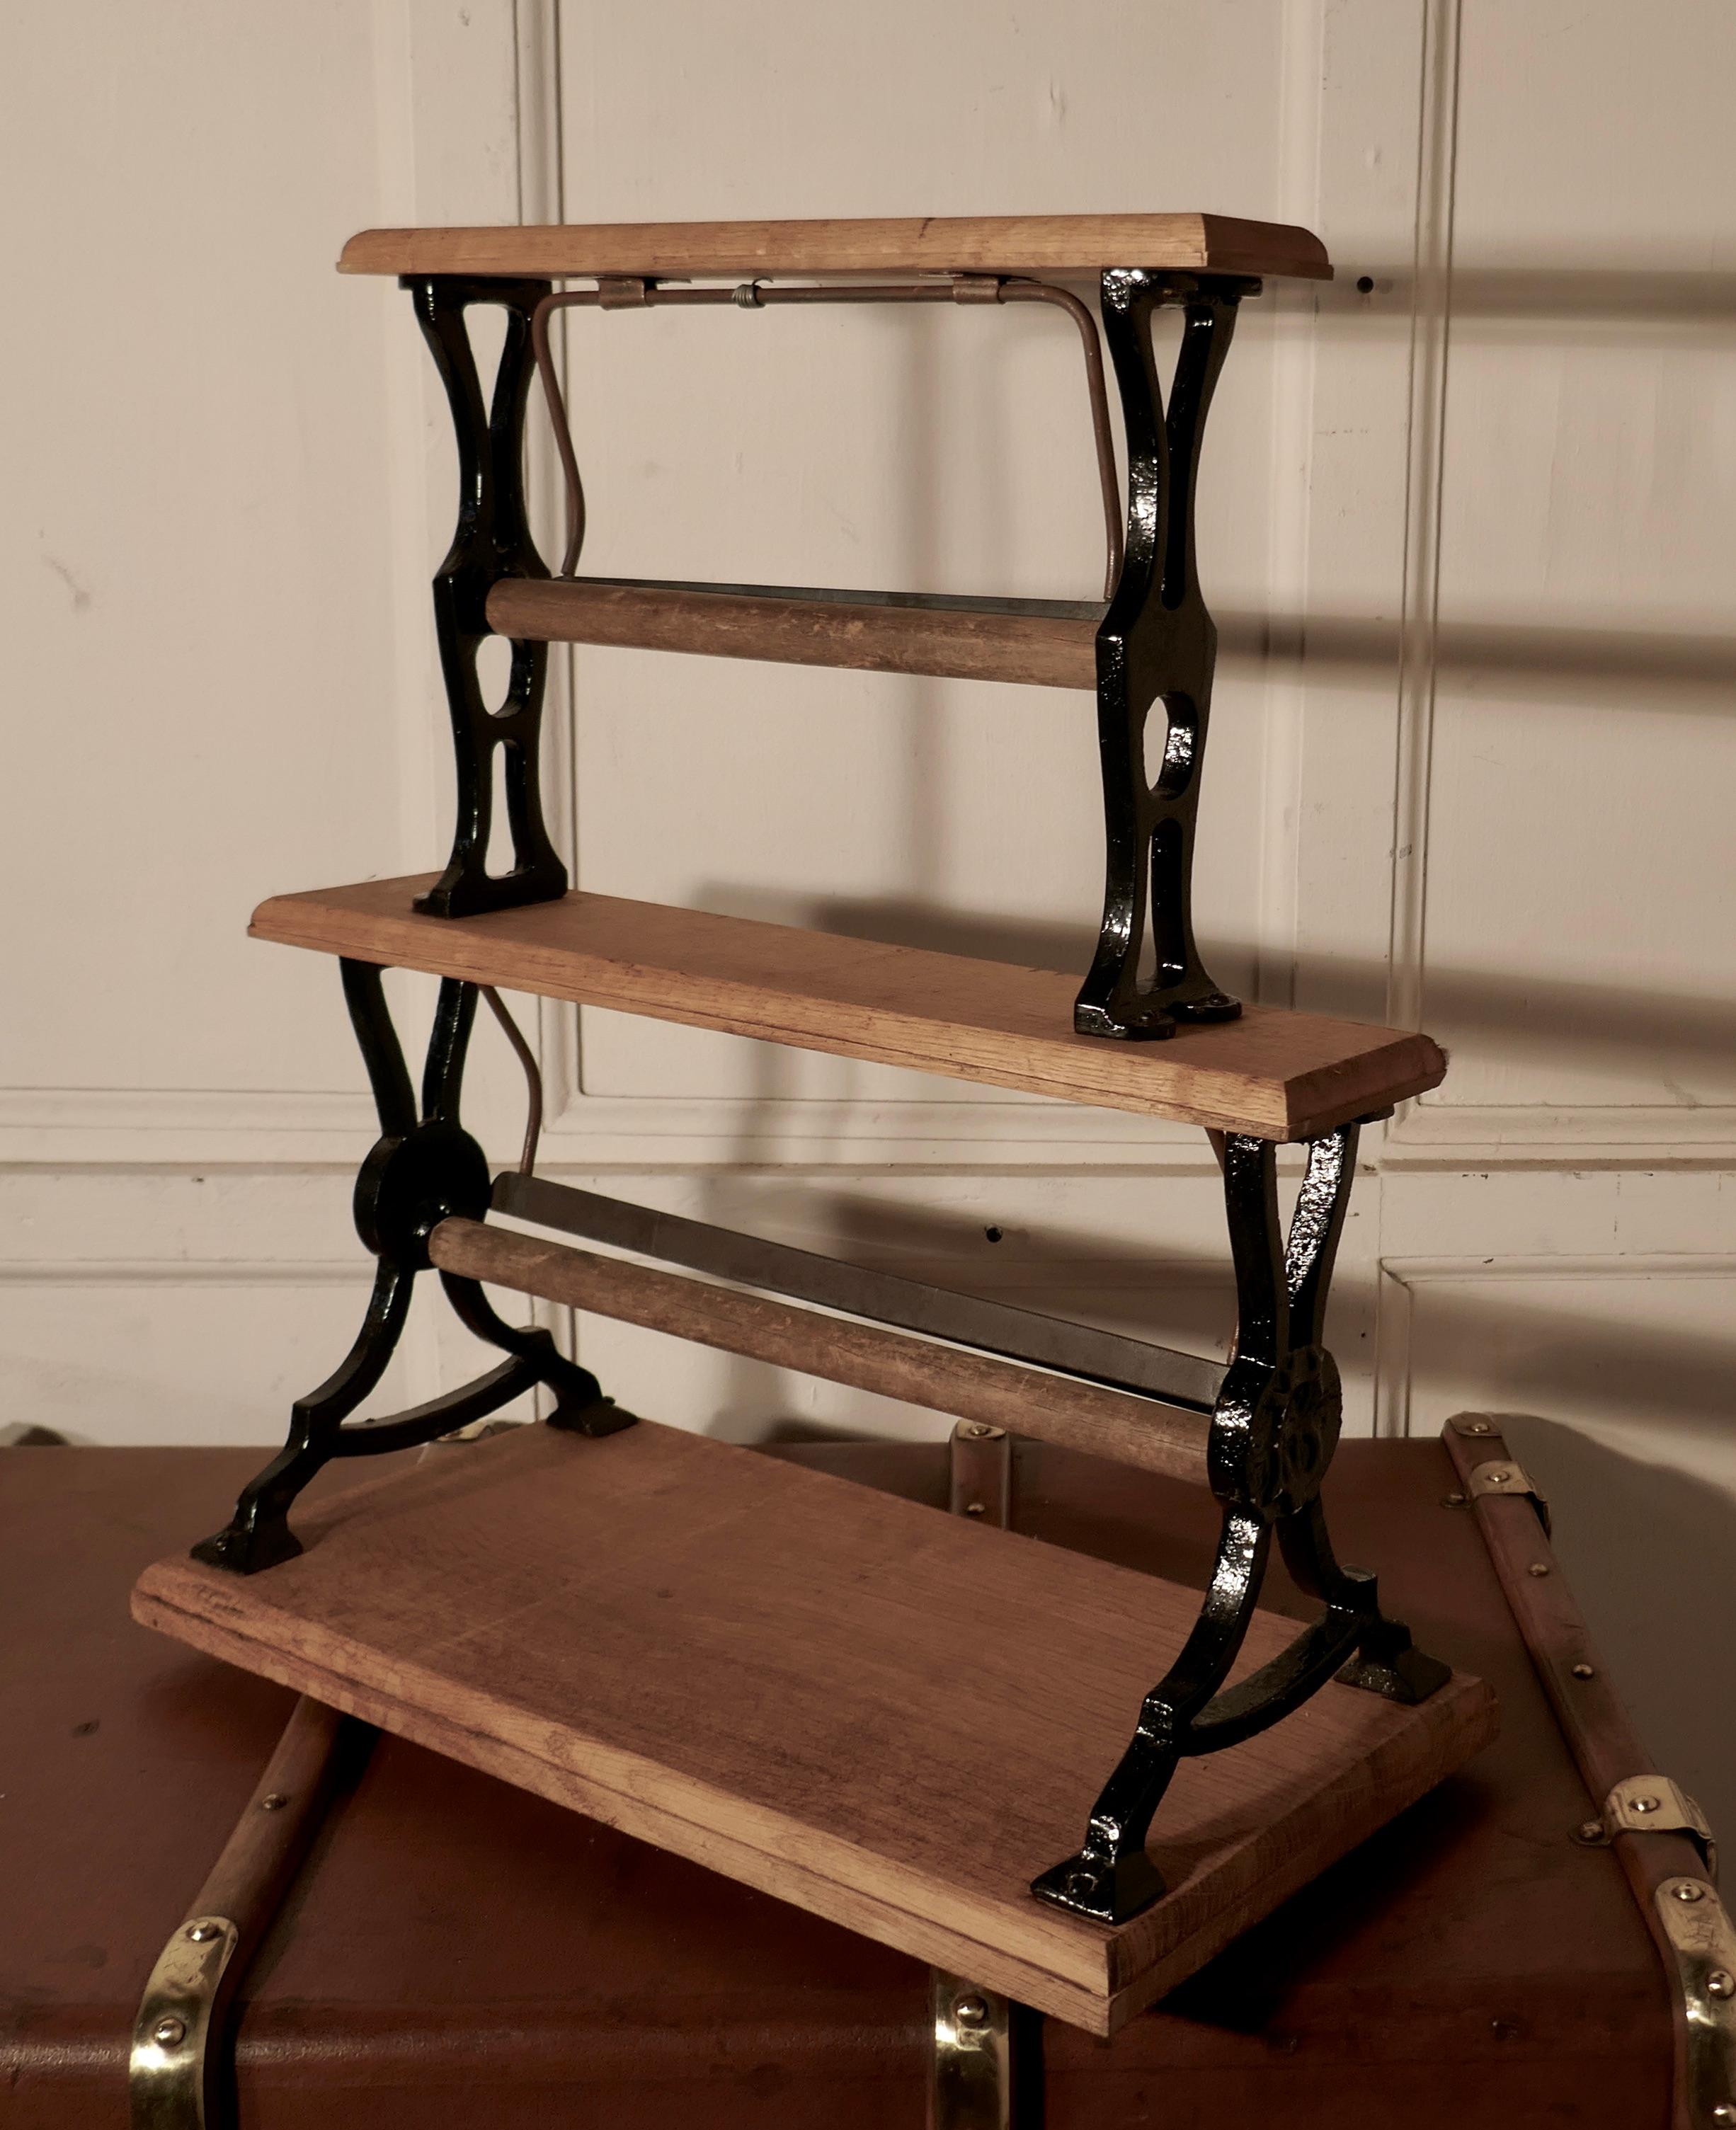 Very rare 19th century shop large double paper roll cutter

This is a rare and very unusual paper roll cutter, the stand is made in golden oak and iron, it holds 2 rolls of paper, the roll holders are set behind a heavy serrated cutting edge, so